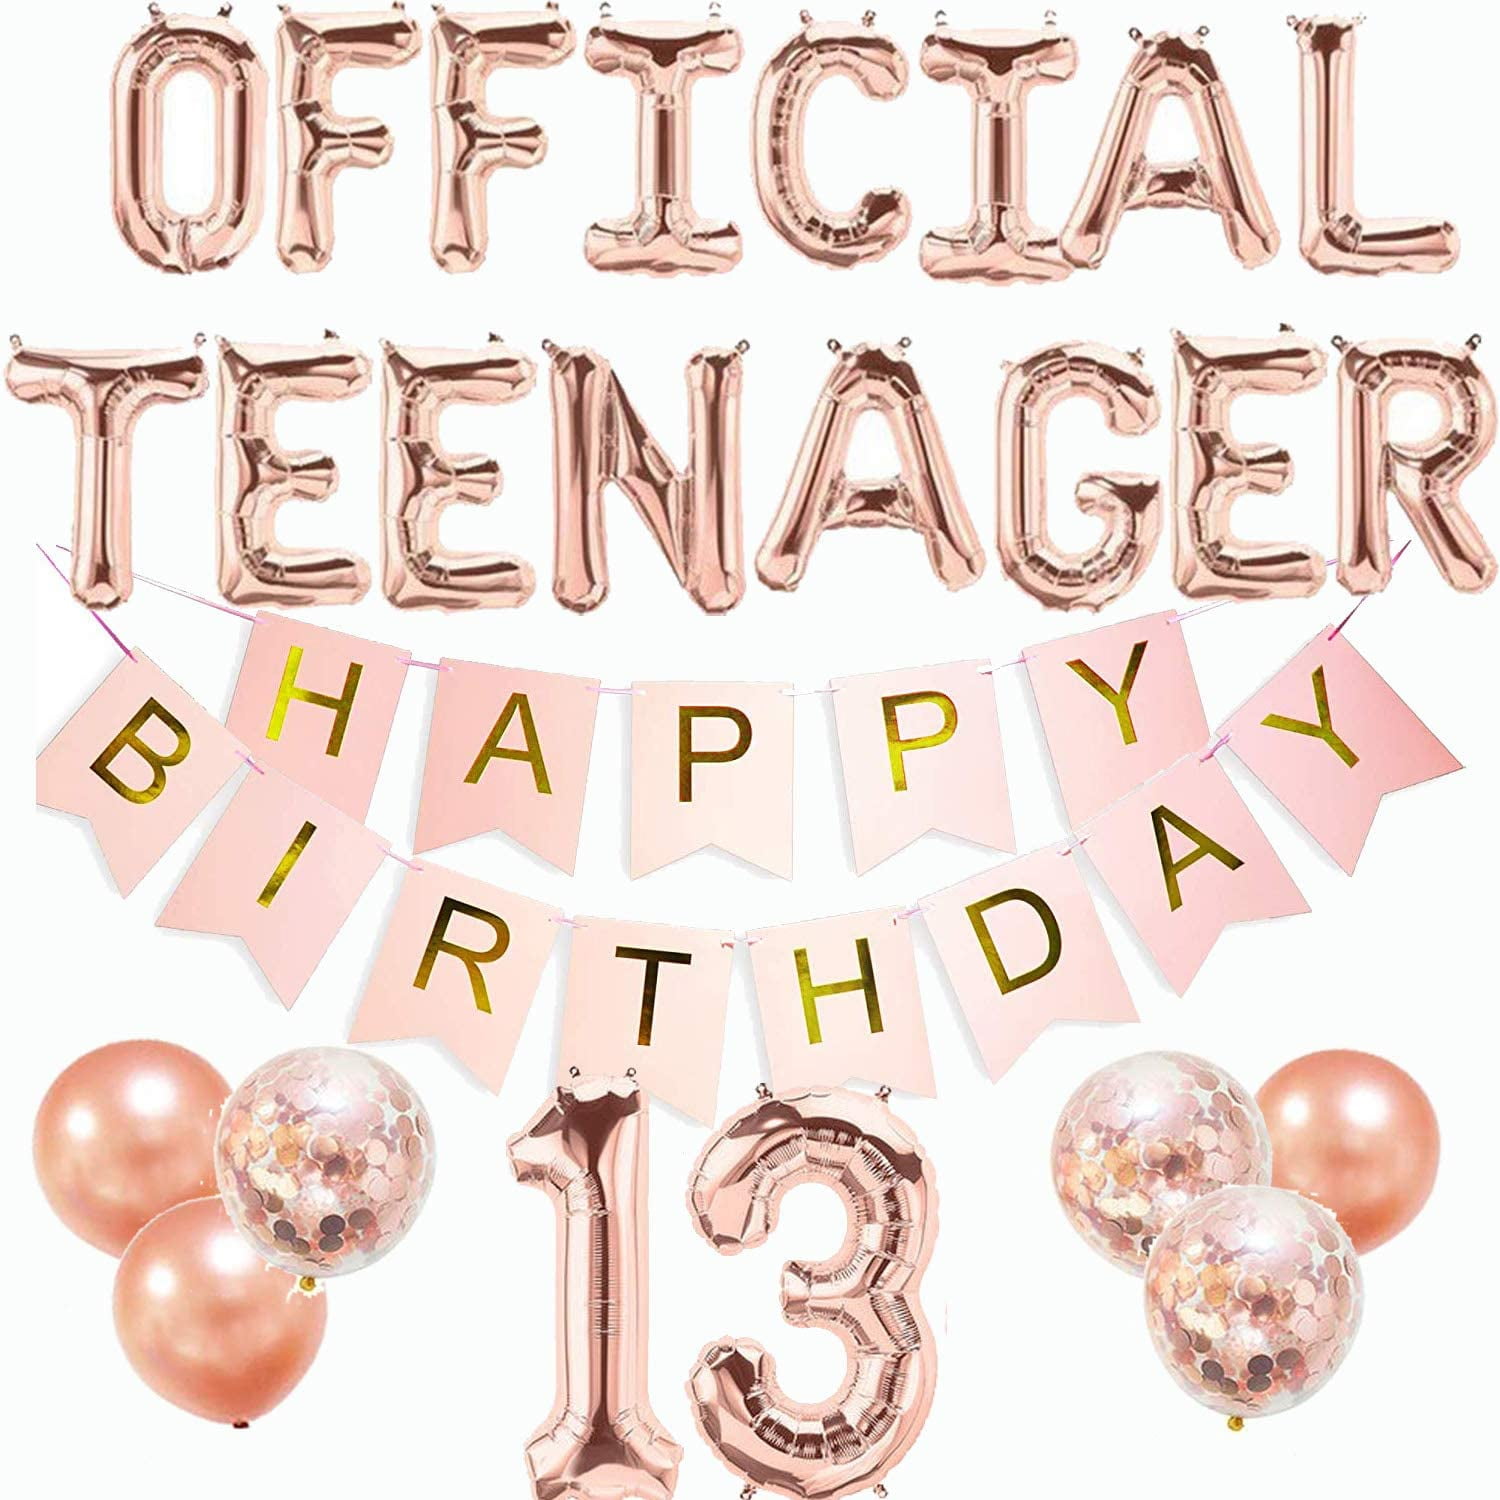 Official Teenager Birthday Decorations 13th Birthday Decorations Girls Boys Official Teenager